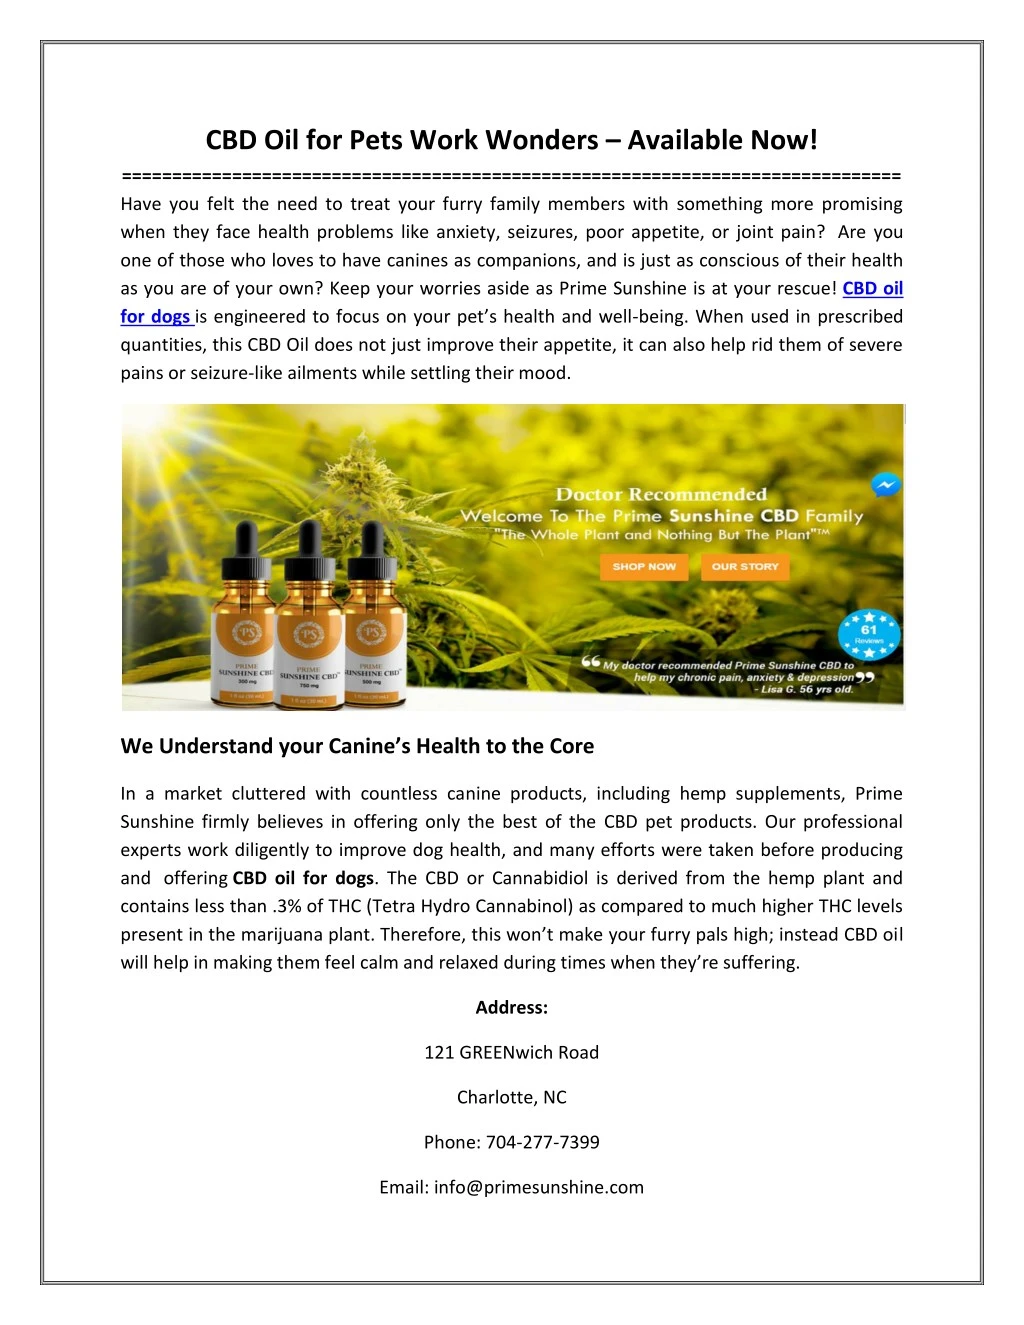 cbd oil for pets work wonders available now have